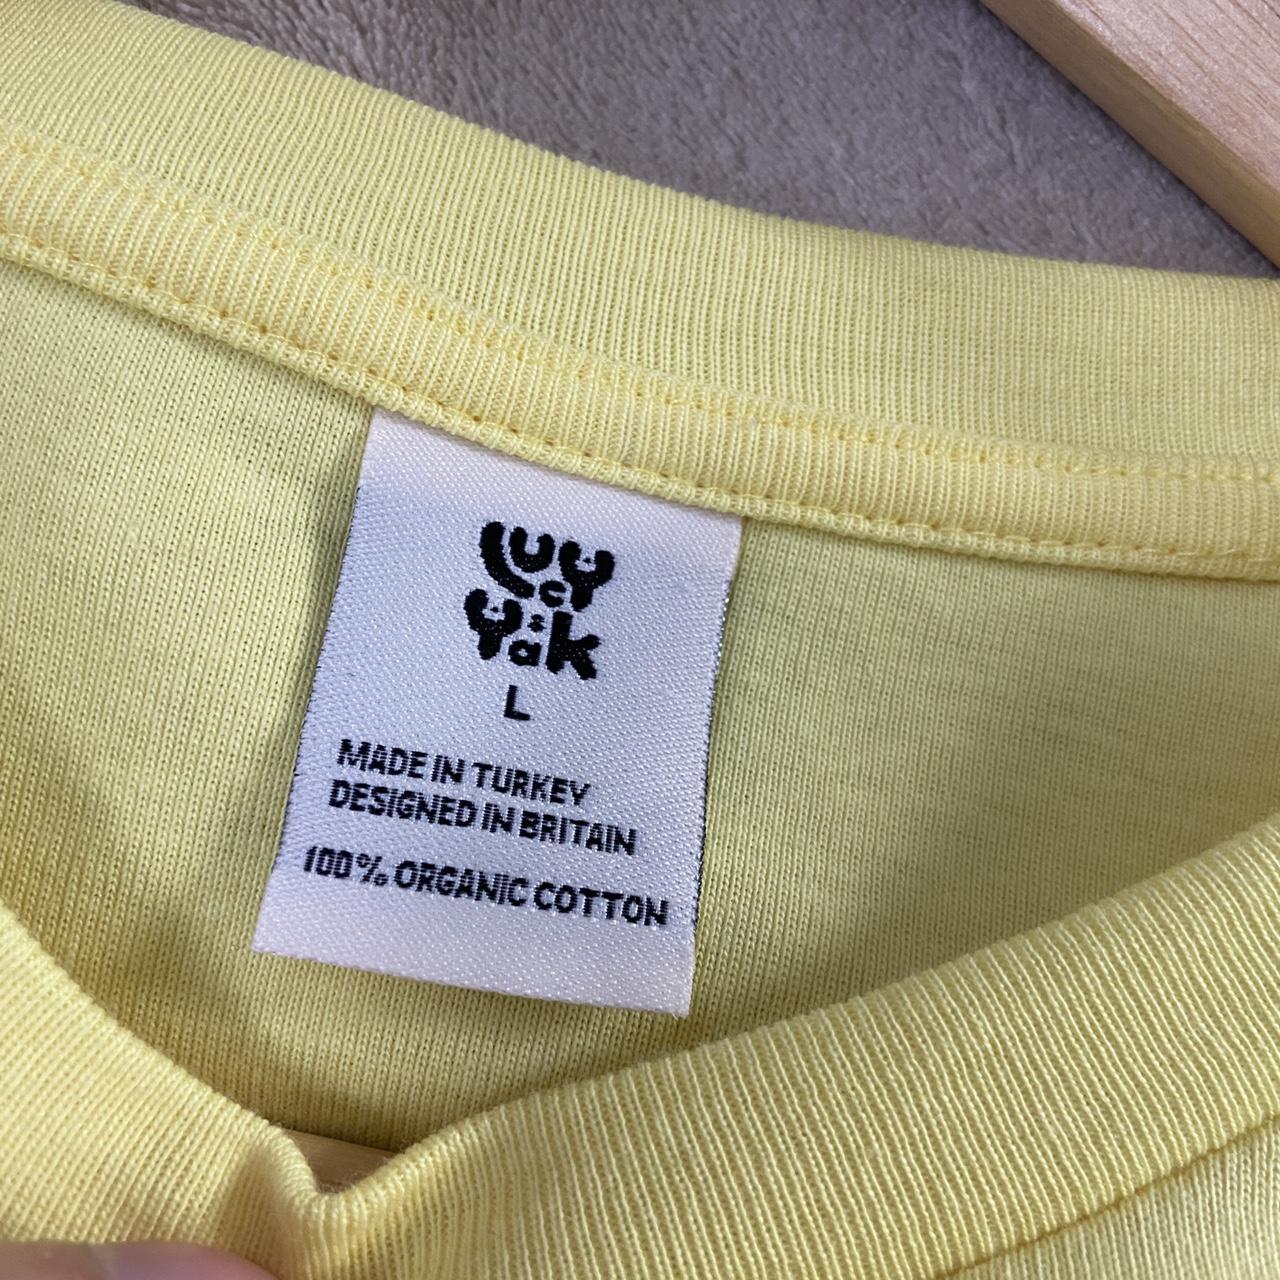 LUCY AND YAK “TAKE CARE” TEE IN YELLOW, SIZE... - Depop